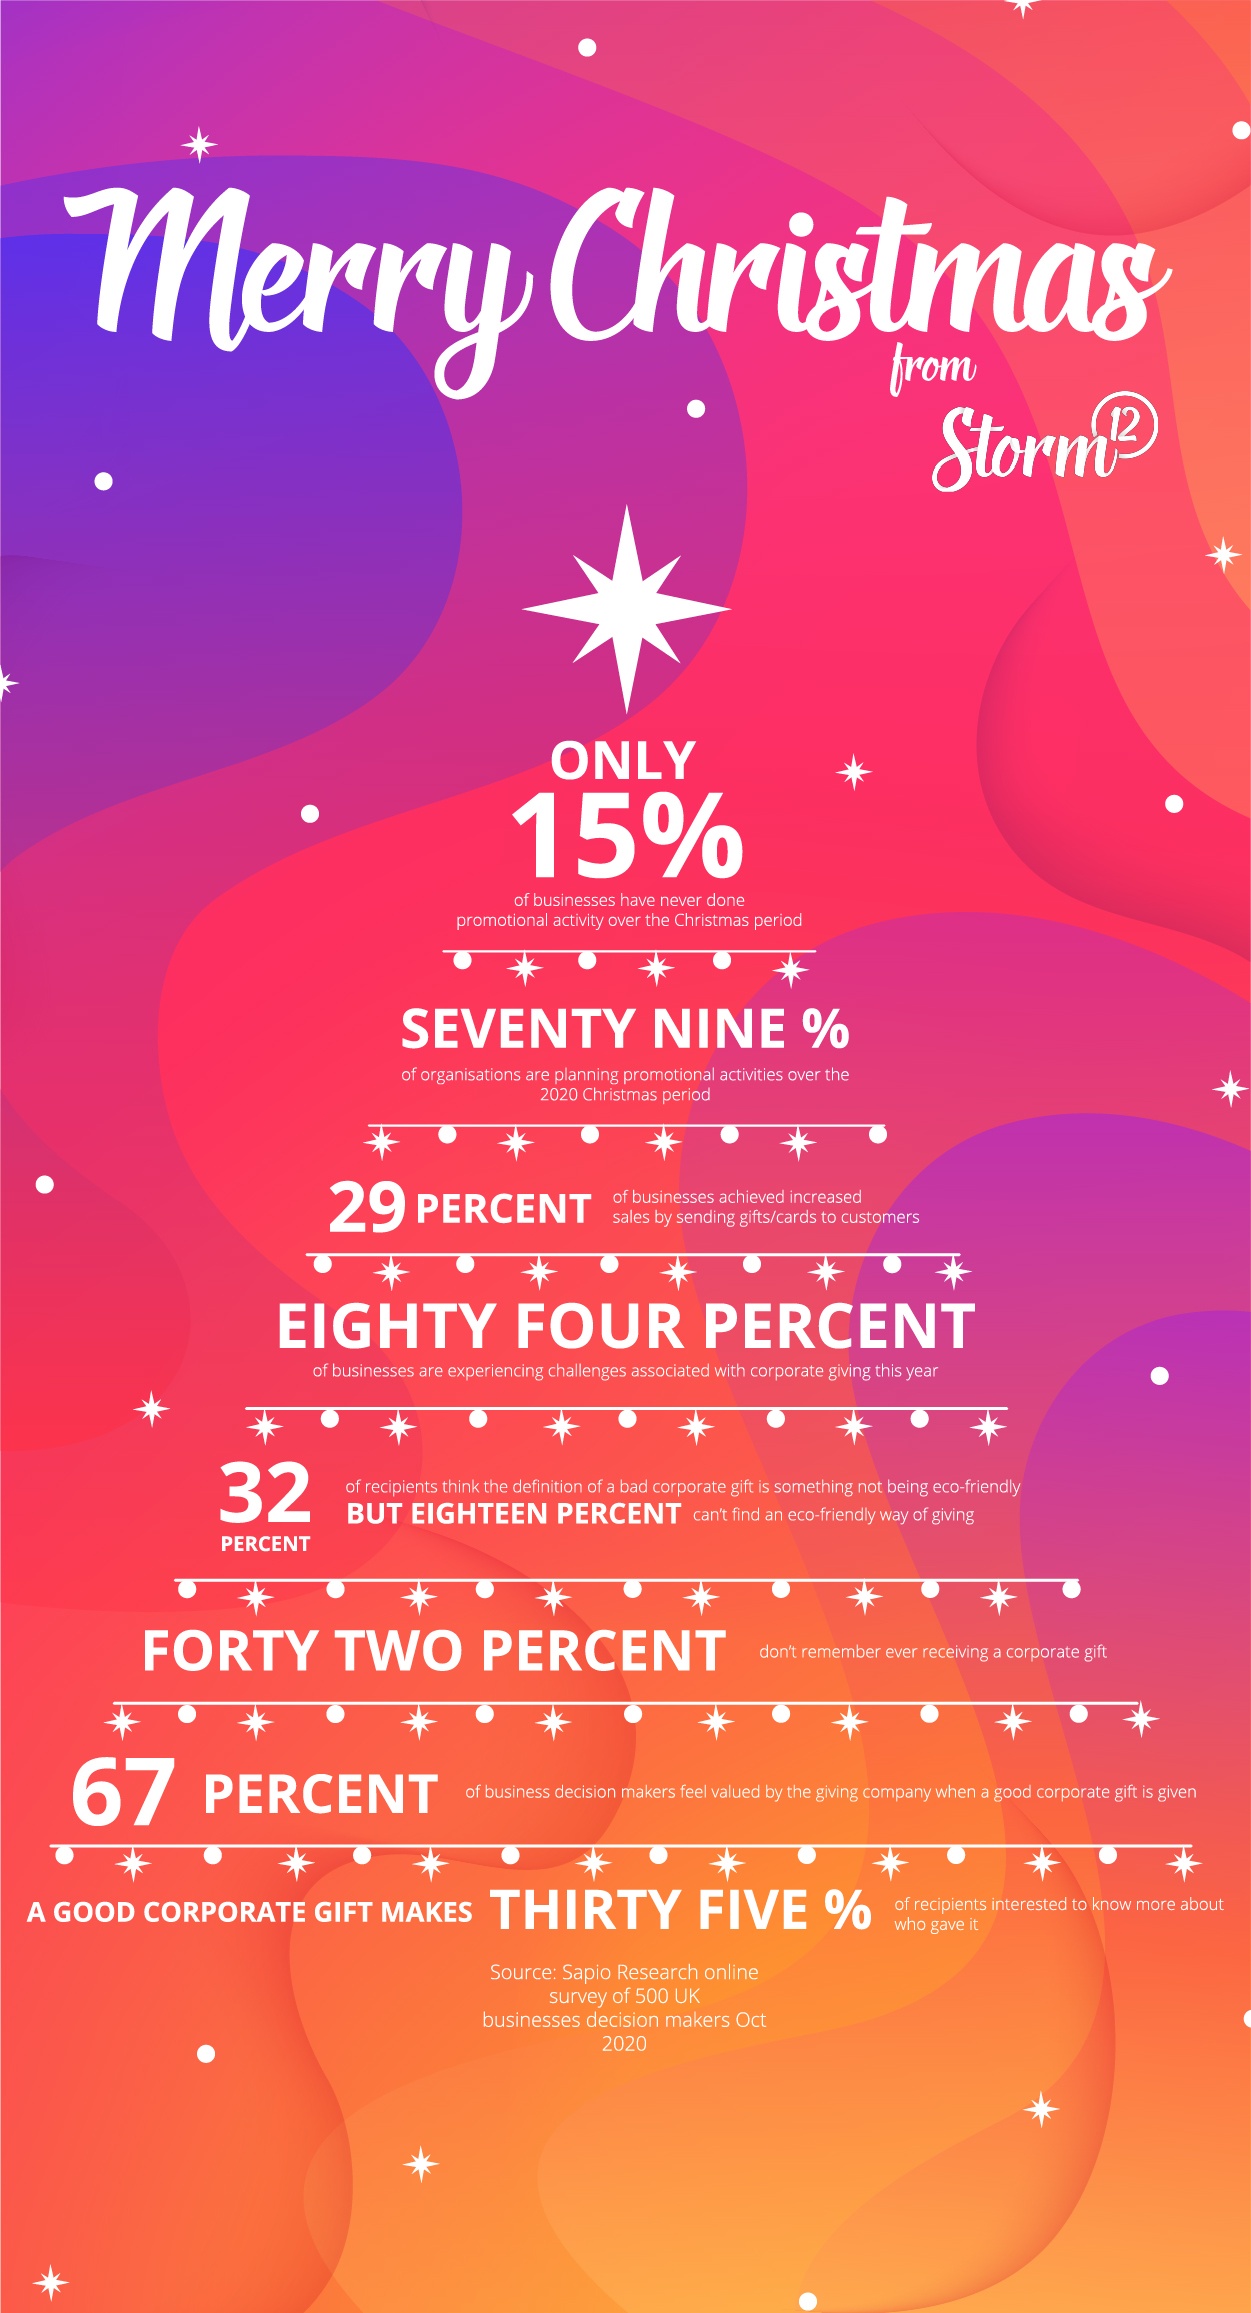 new_christmas_infographic_storm_12_2313